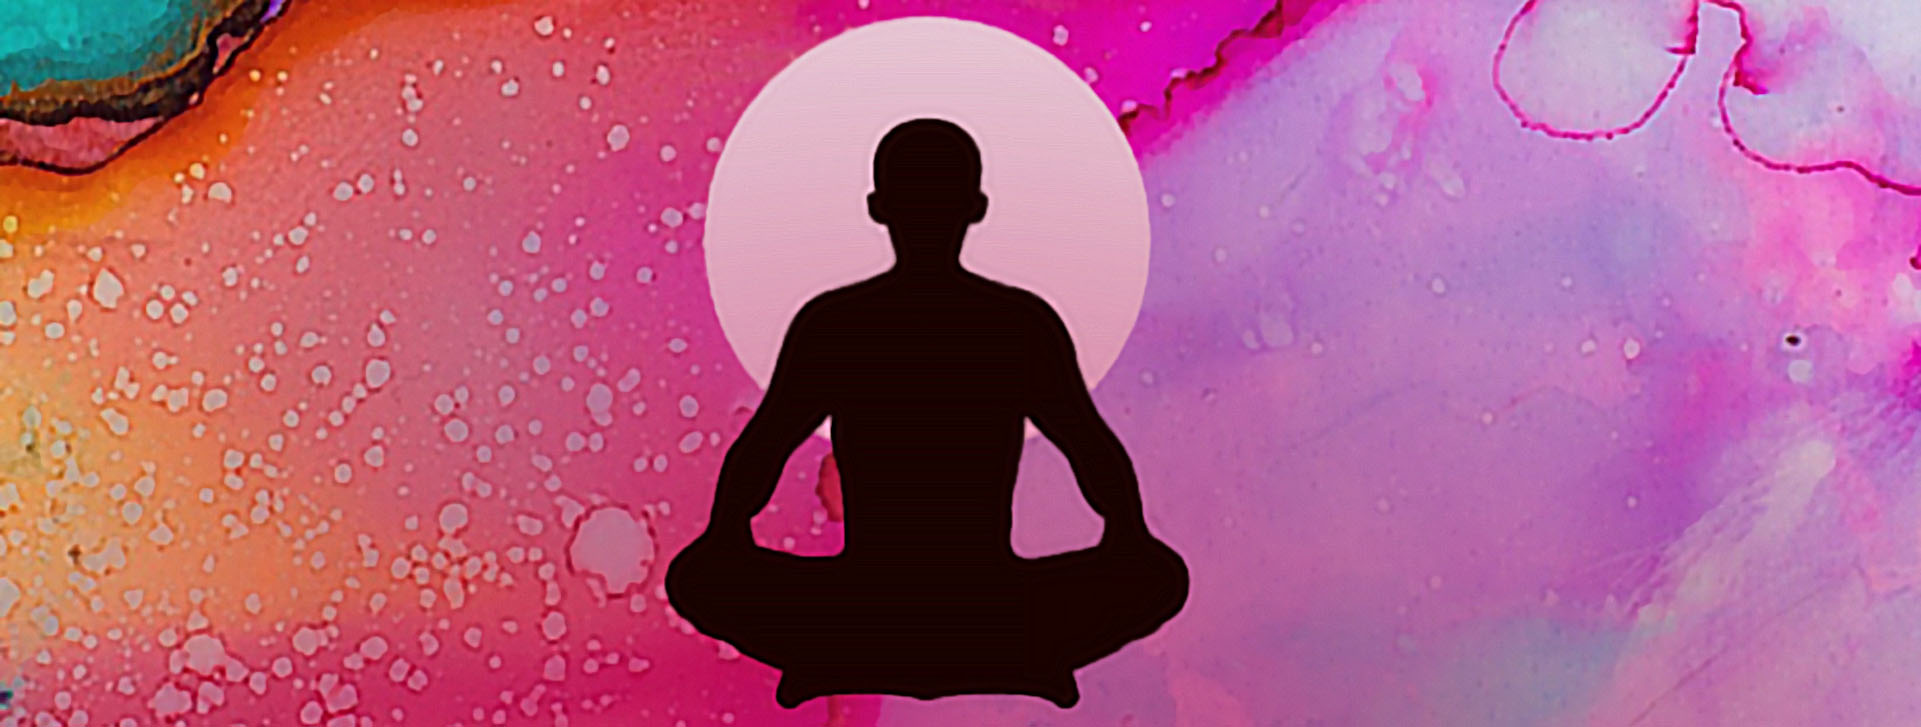 Silhouette of a person sitting in meditation pose in front of a multi colored background.